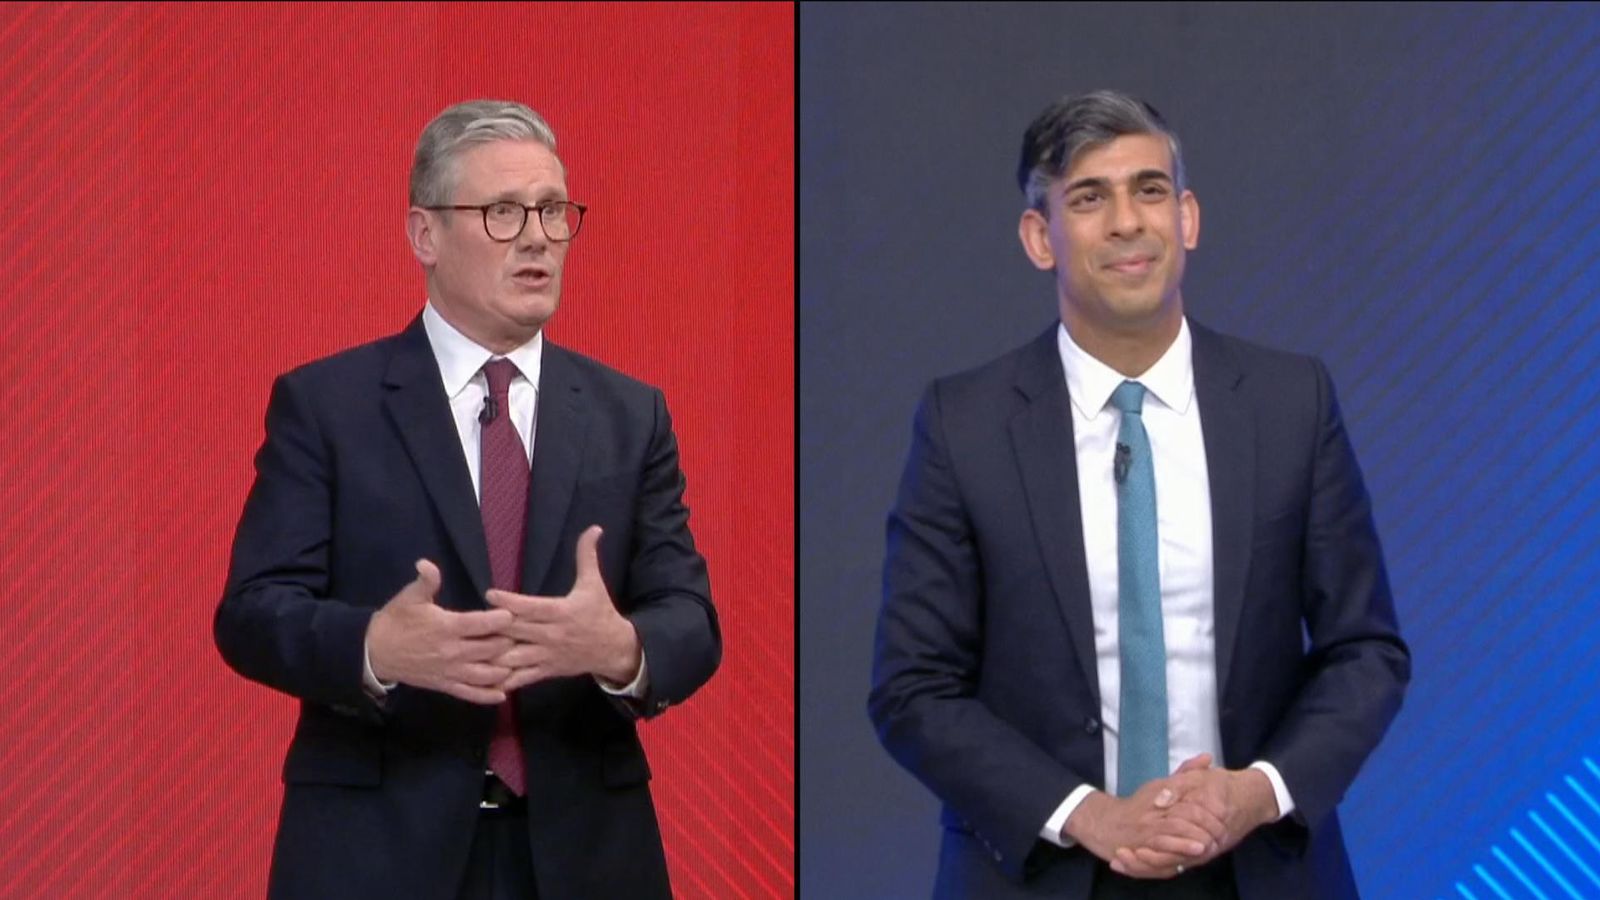 Keir Starmer remains mute on key tax issues as Rishi Sunak receives a bruising during Sky News' Battle For No 10